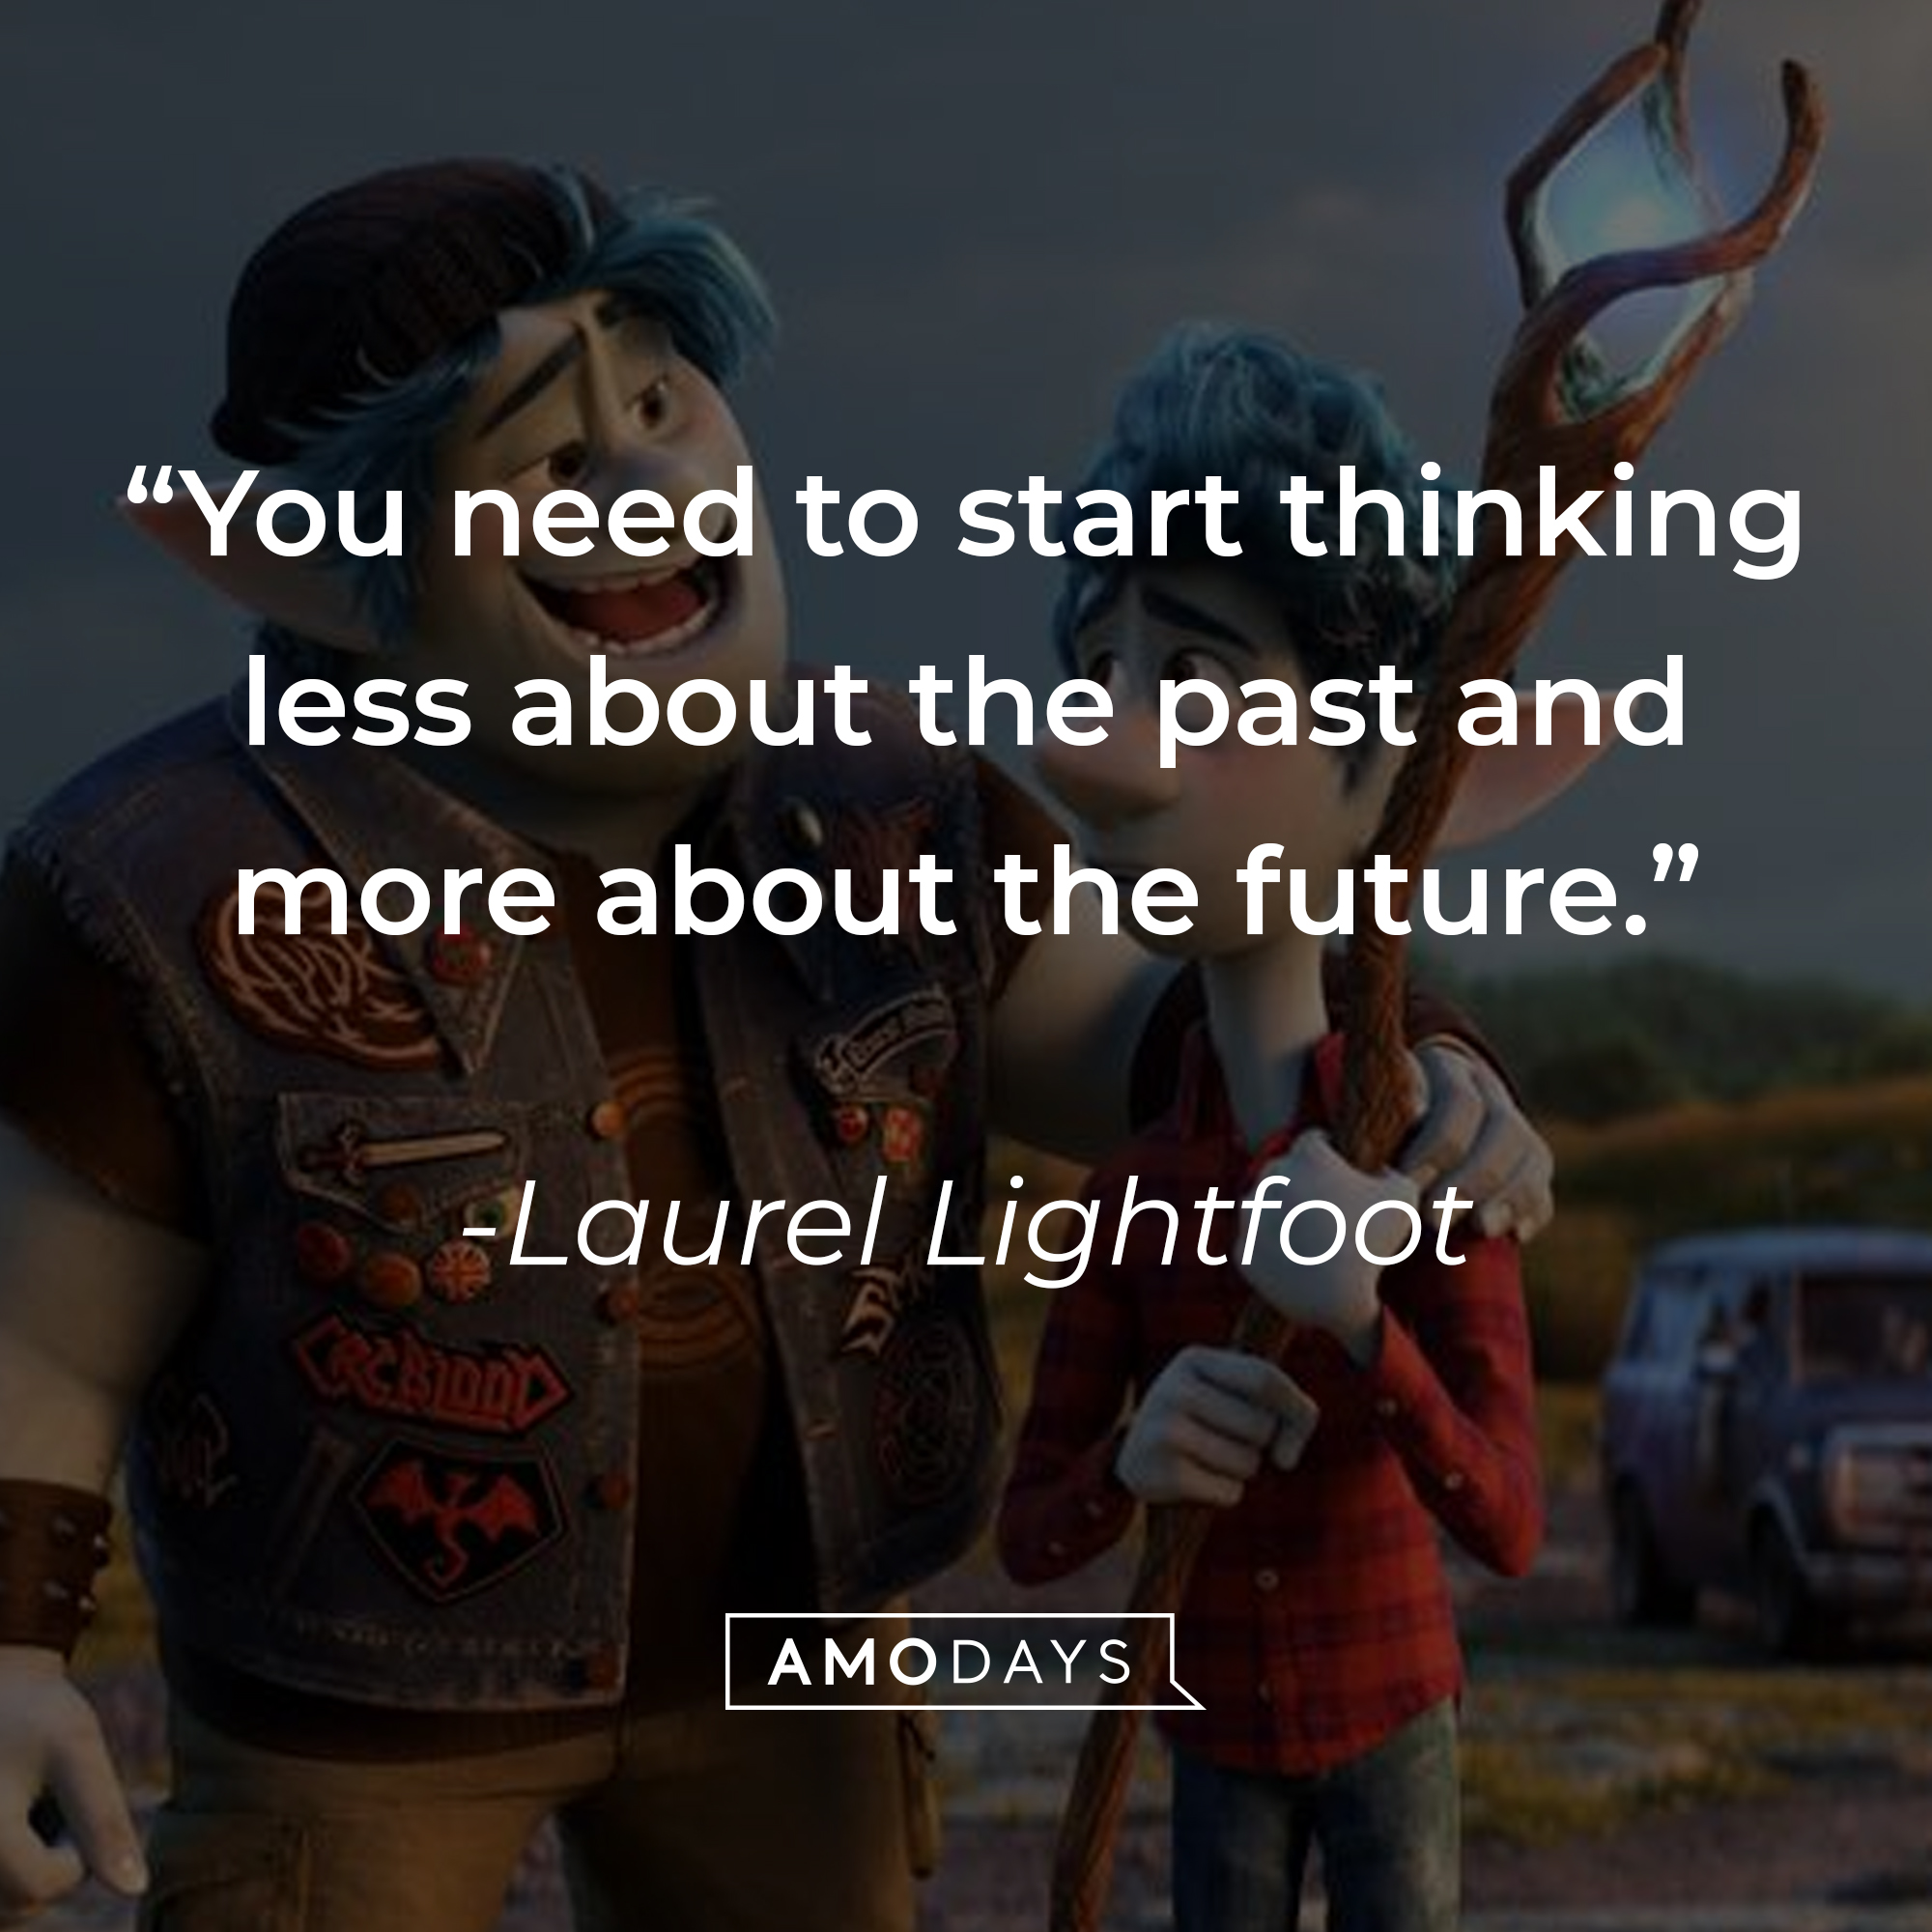 A still from Disney's "Onward" with Laurel Lightfoot's quote: "You need to start thinking less about the past and more about the future." | Source: facebook.com/pixaronward